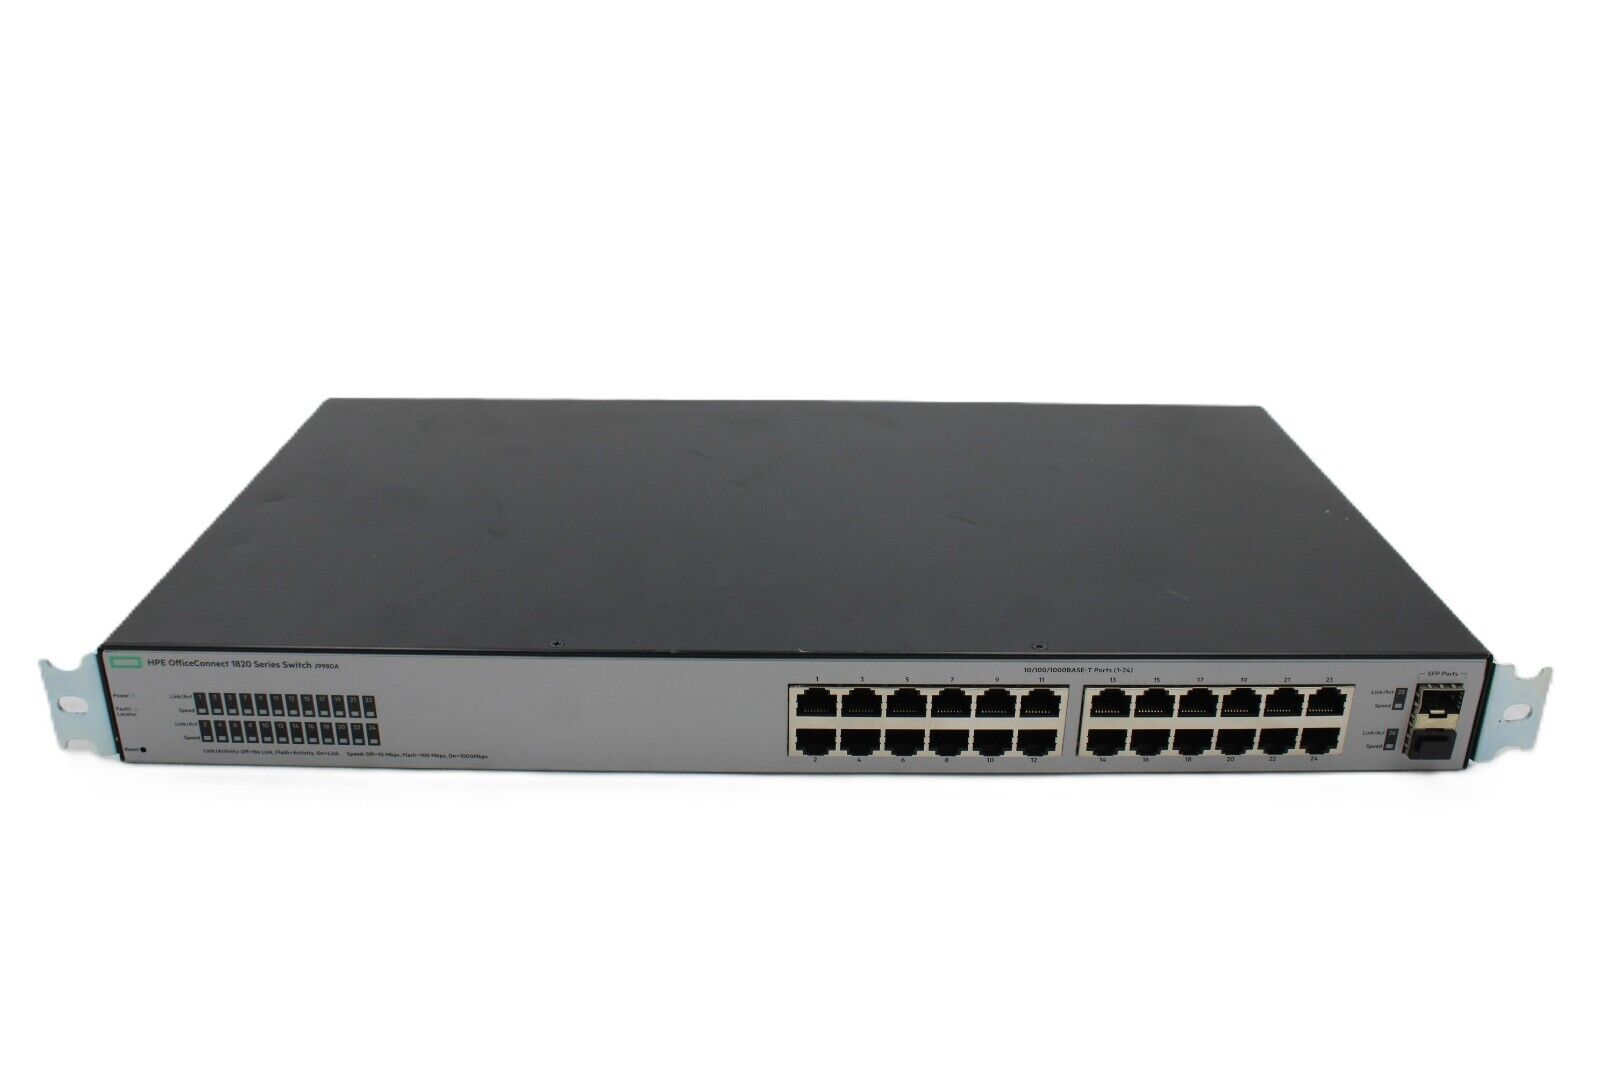 HPE OfficeConnect 1820-24G 24 port POE+ 1Gb/s Gigabit 2 SFP J9980A Switch